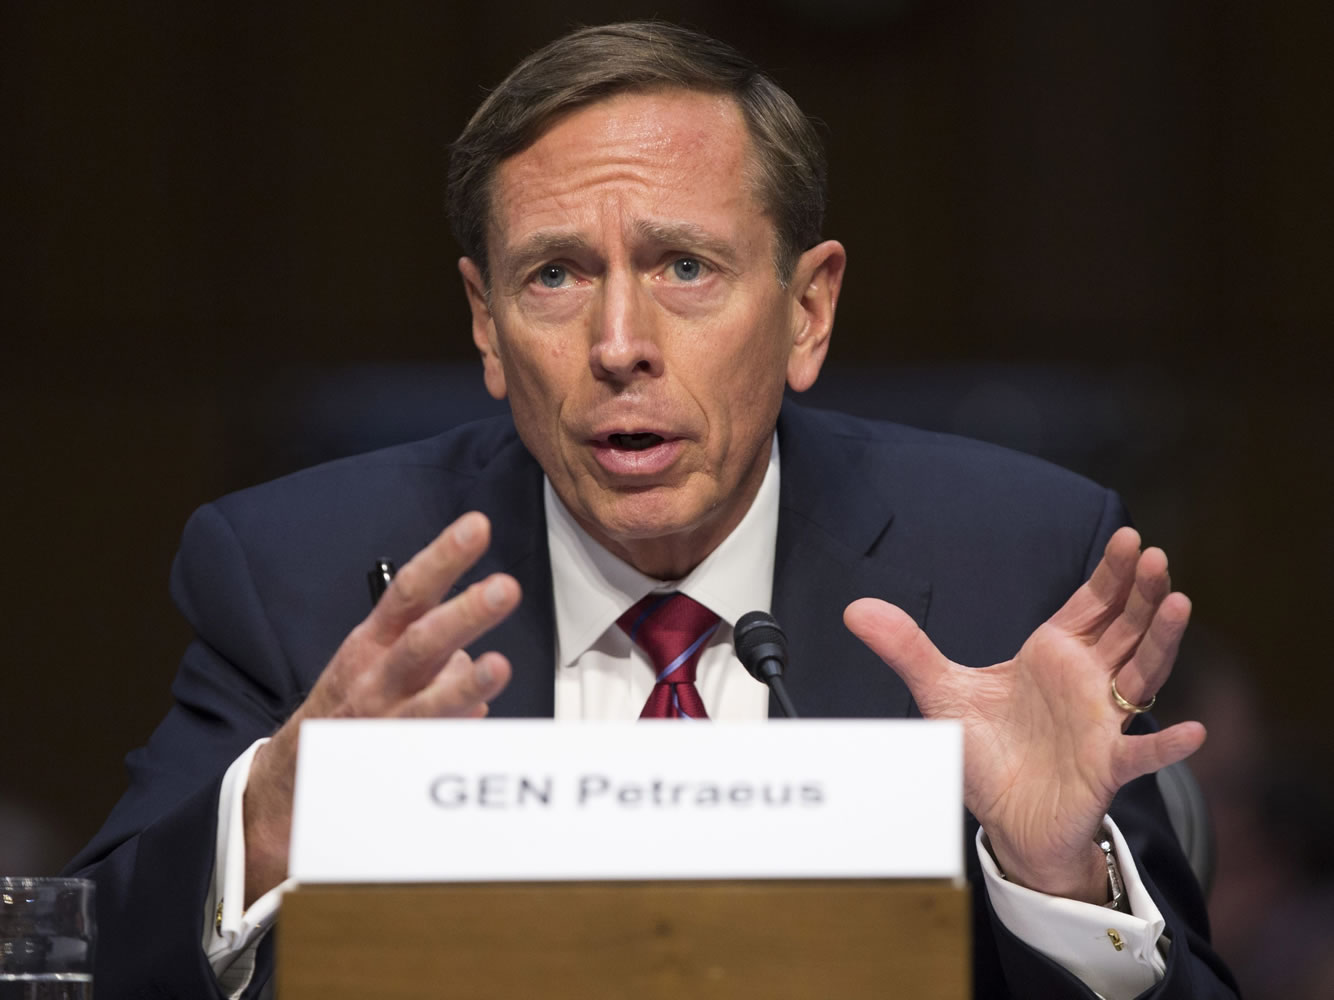 Former CIA Director David Petraeus testifies on Capitol Hill in Washington. The House Benghazi Committee that is looking into the deadly 2012 attacks in Benghazi, Libya is interviewing Petraeus behind closed doors as the investigation enters its third calendar year, and a presidential election year.